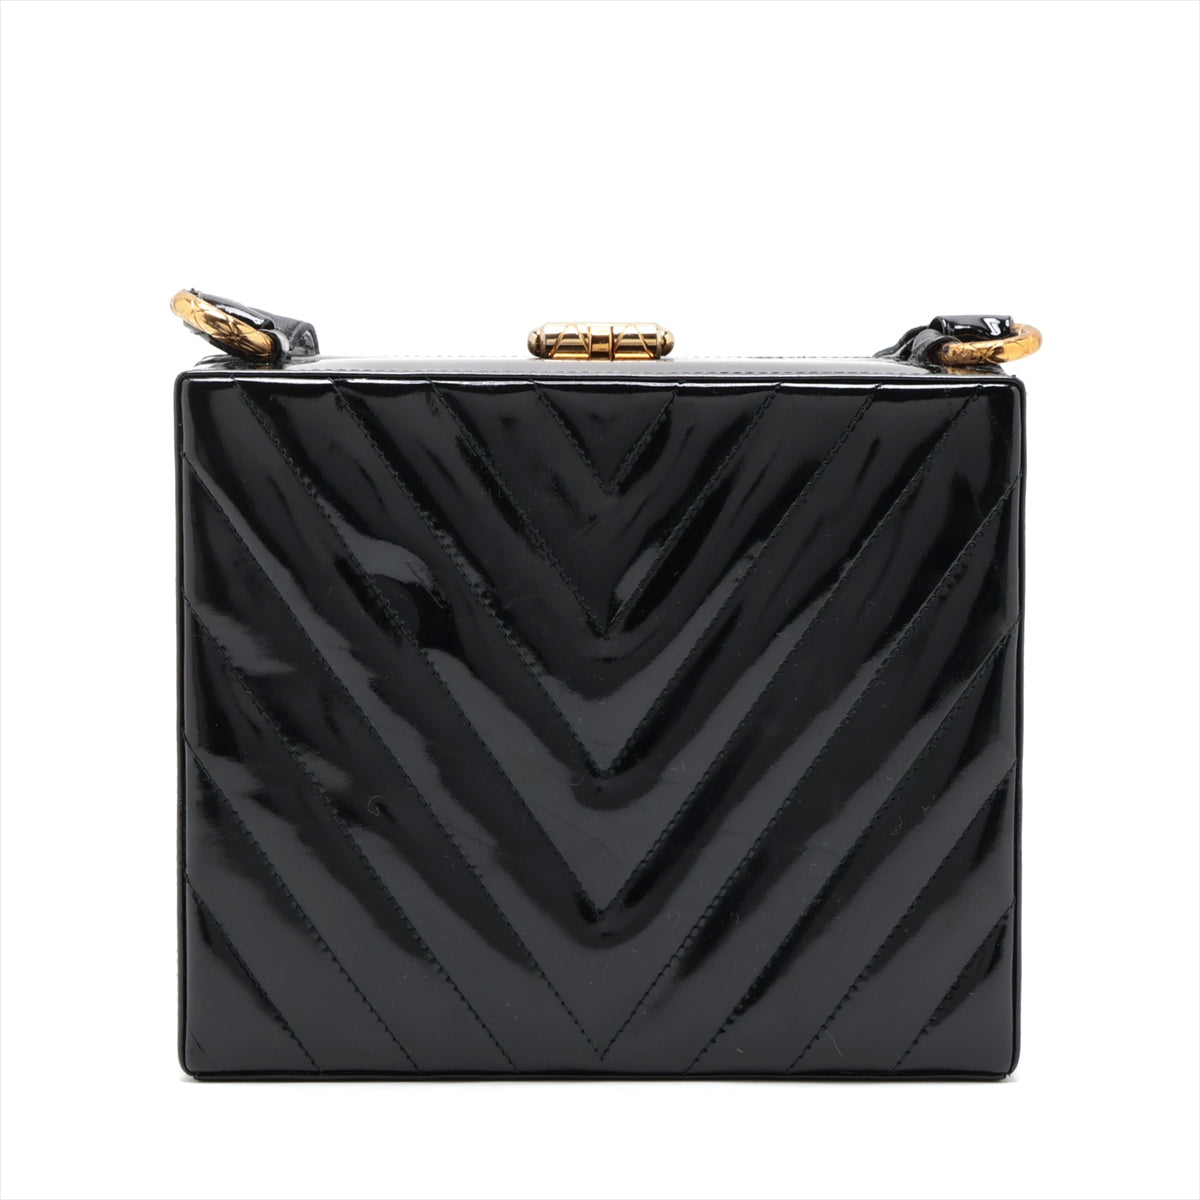 Chanel V Stitch Patent Leather Shoulder Bag Coco Mark Black Gold Metal Fittings The fastener makes a slight noise